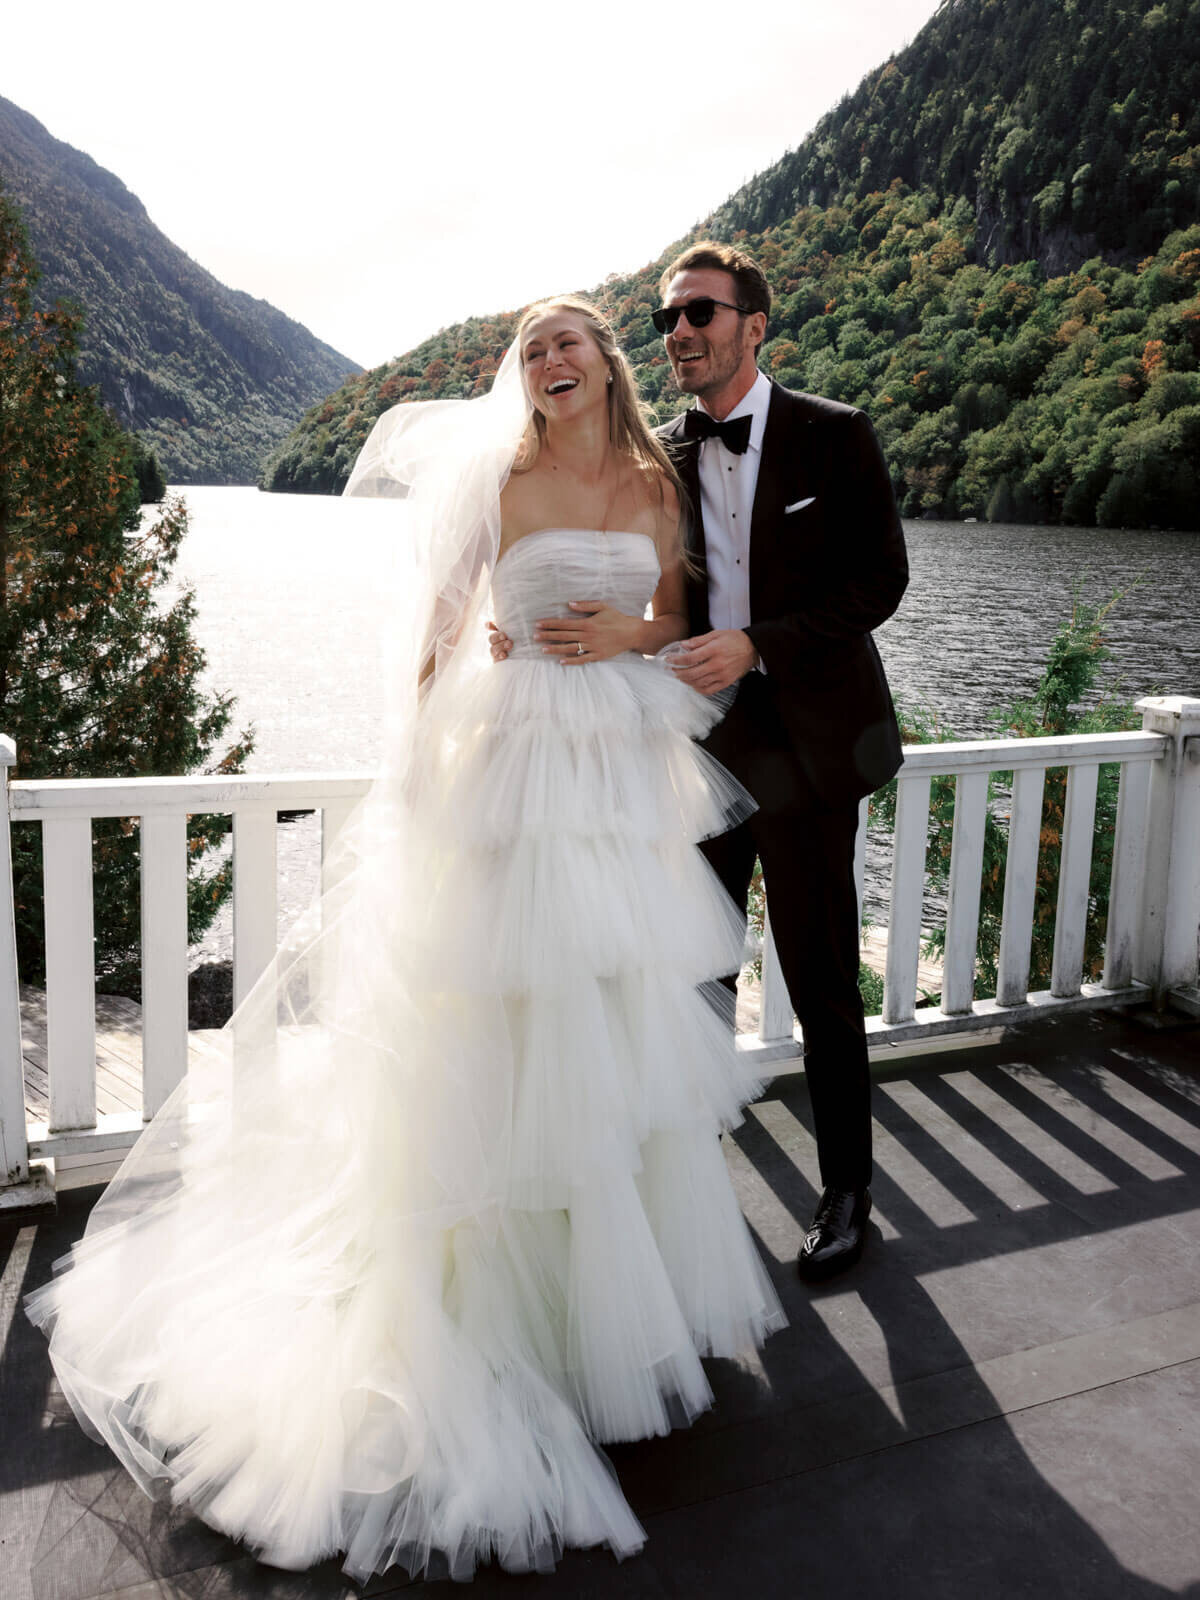 The bride and the groom are smiling and standing on a terrace, overlooking waters and mountains, at The Ausable Club, New York.